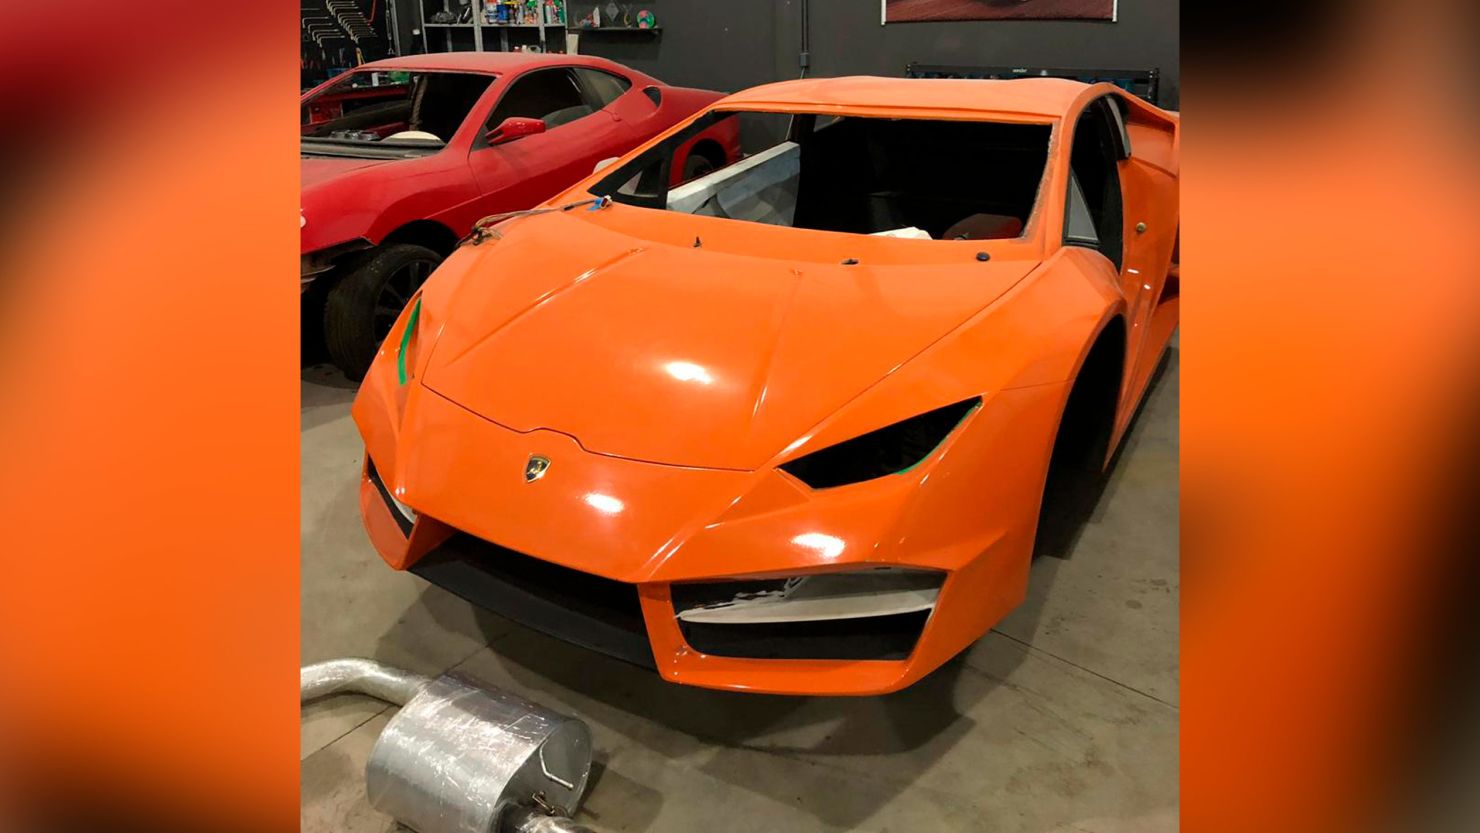 Police said the father and son sold the fake Ferraris and Lamborghinis through social media.